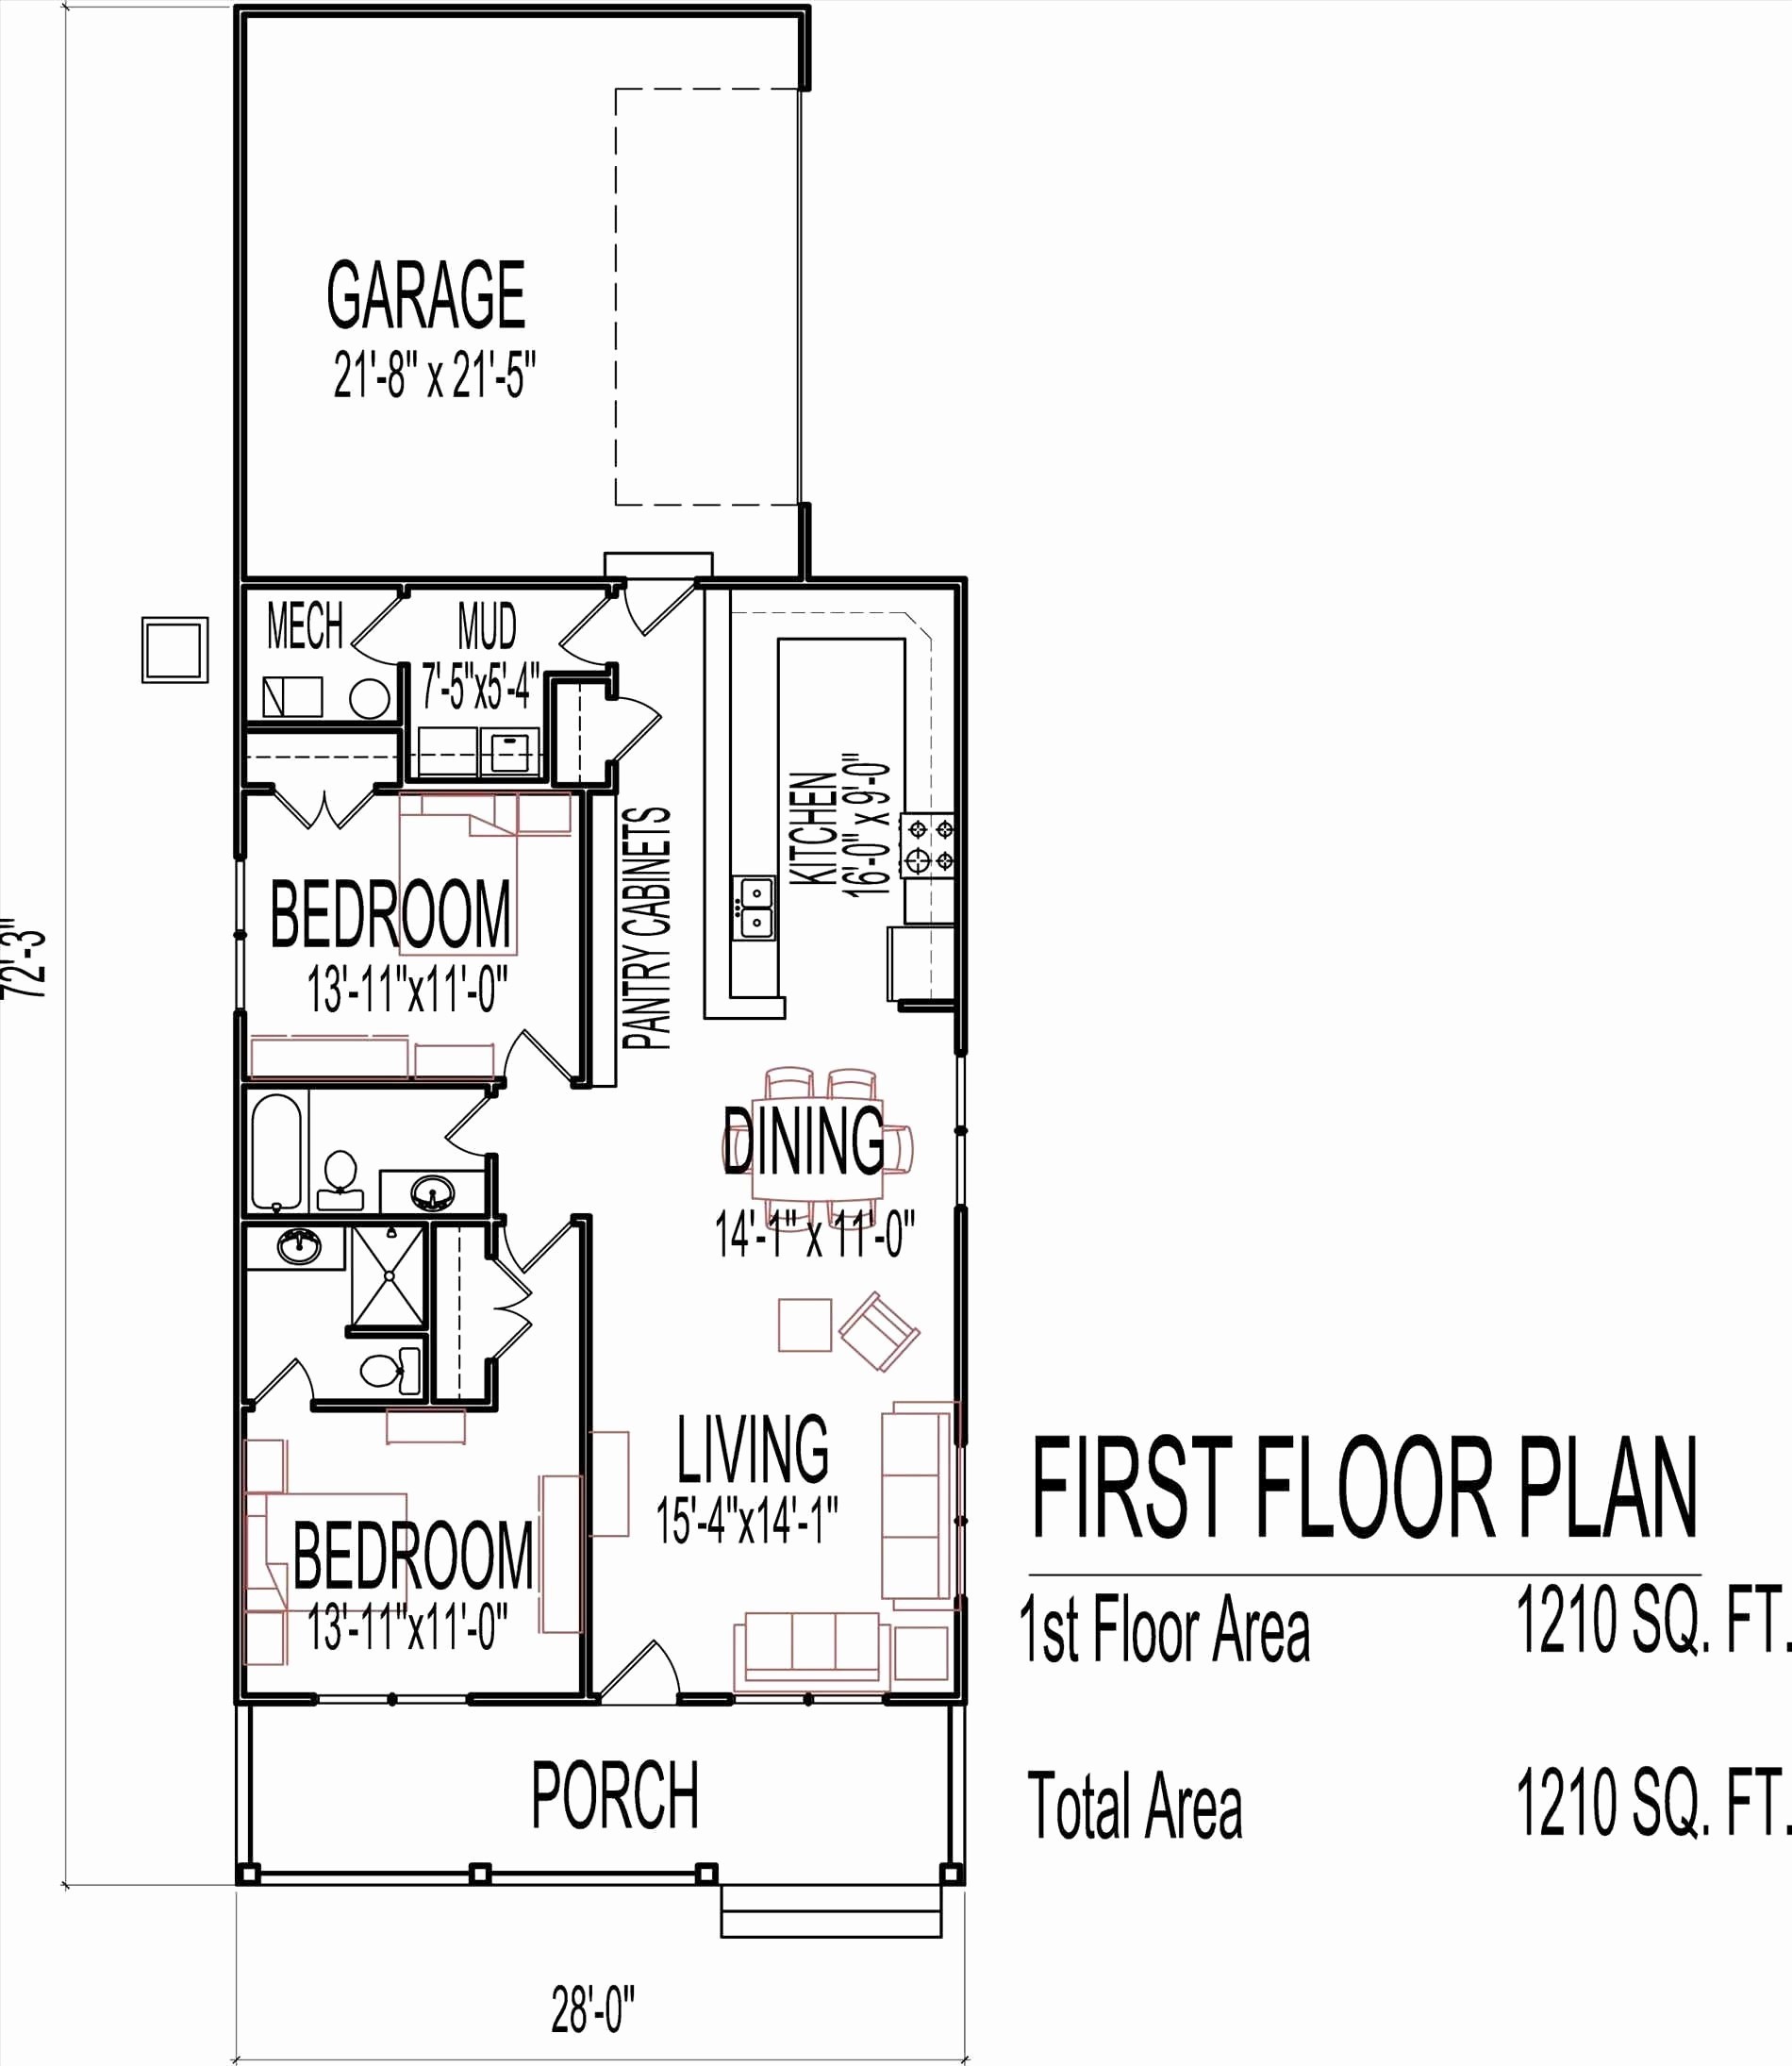 House Plan with Electrical Layout Elegant Two Story House Floor Plans with Basement Inspirational House Plan